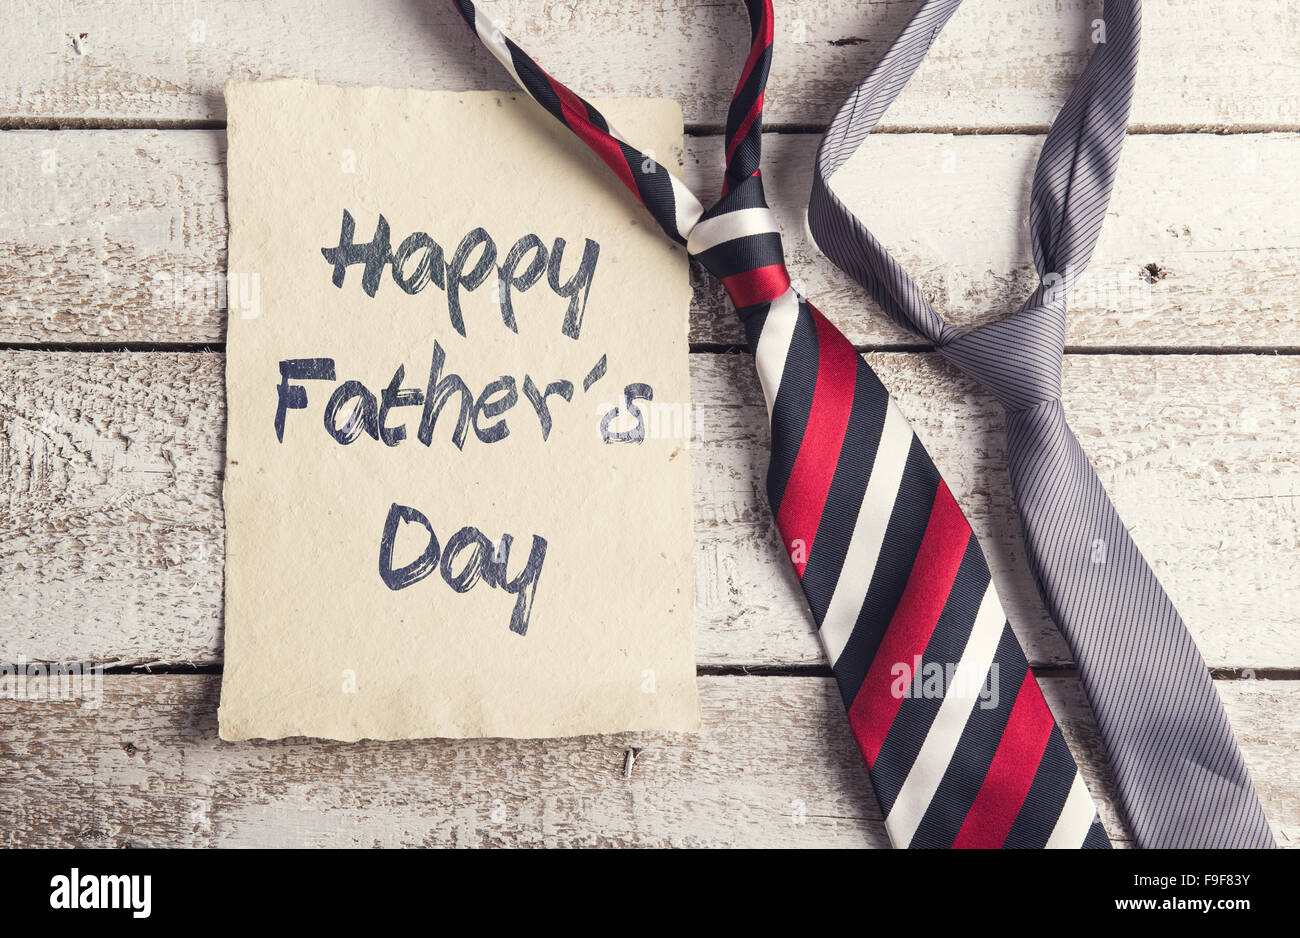 Happy fathers day sign on paper and colorful ties laid on wooden floor backround. Stock Photo